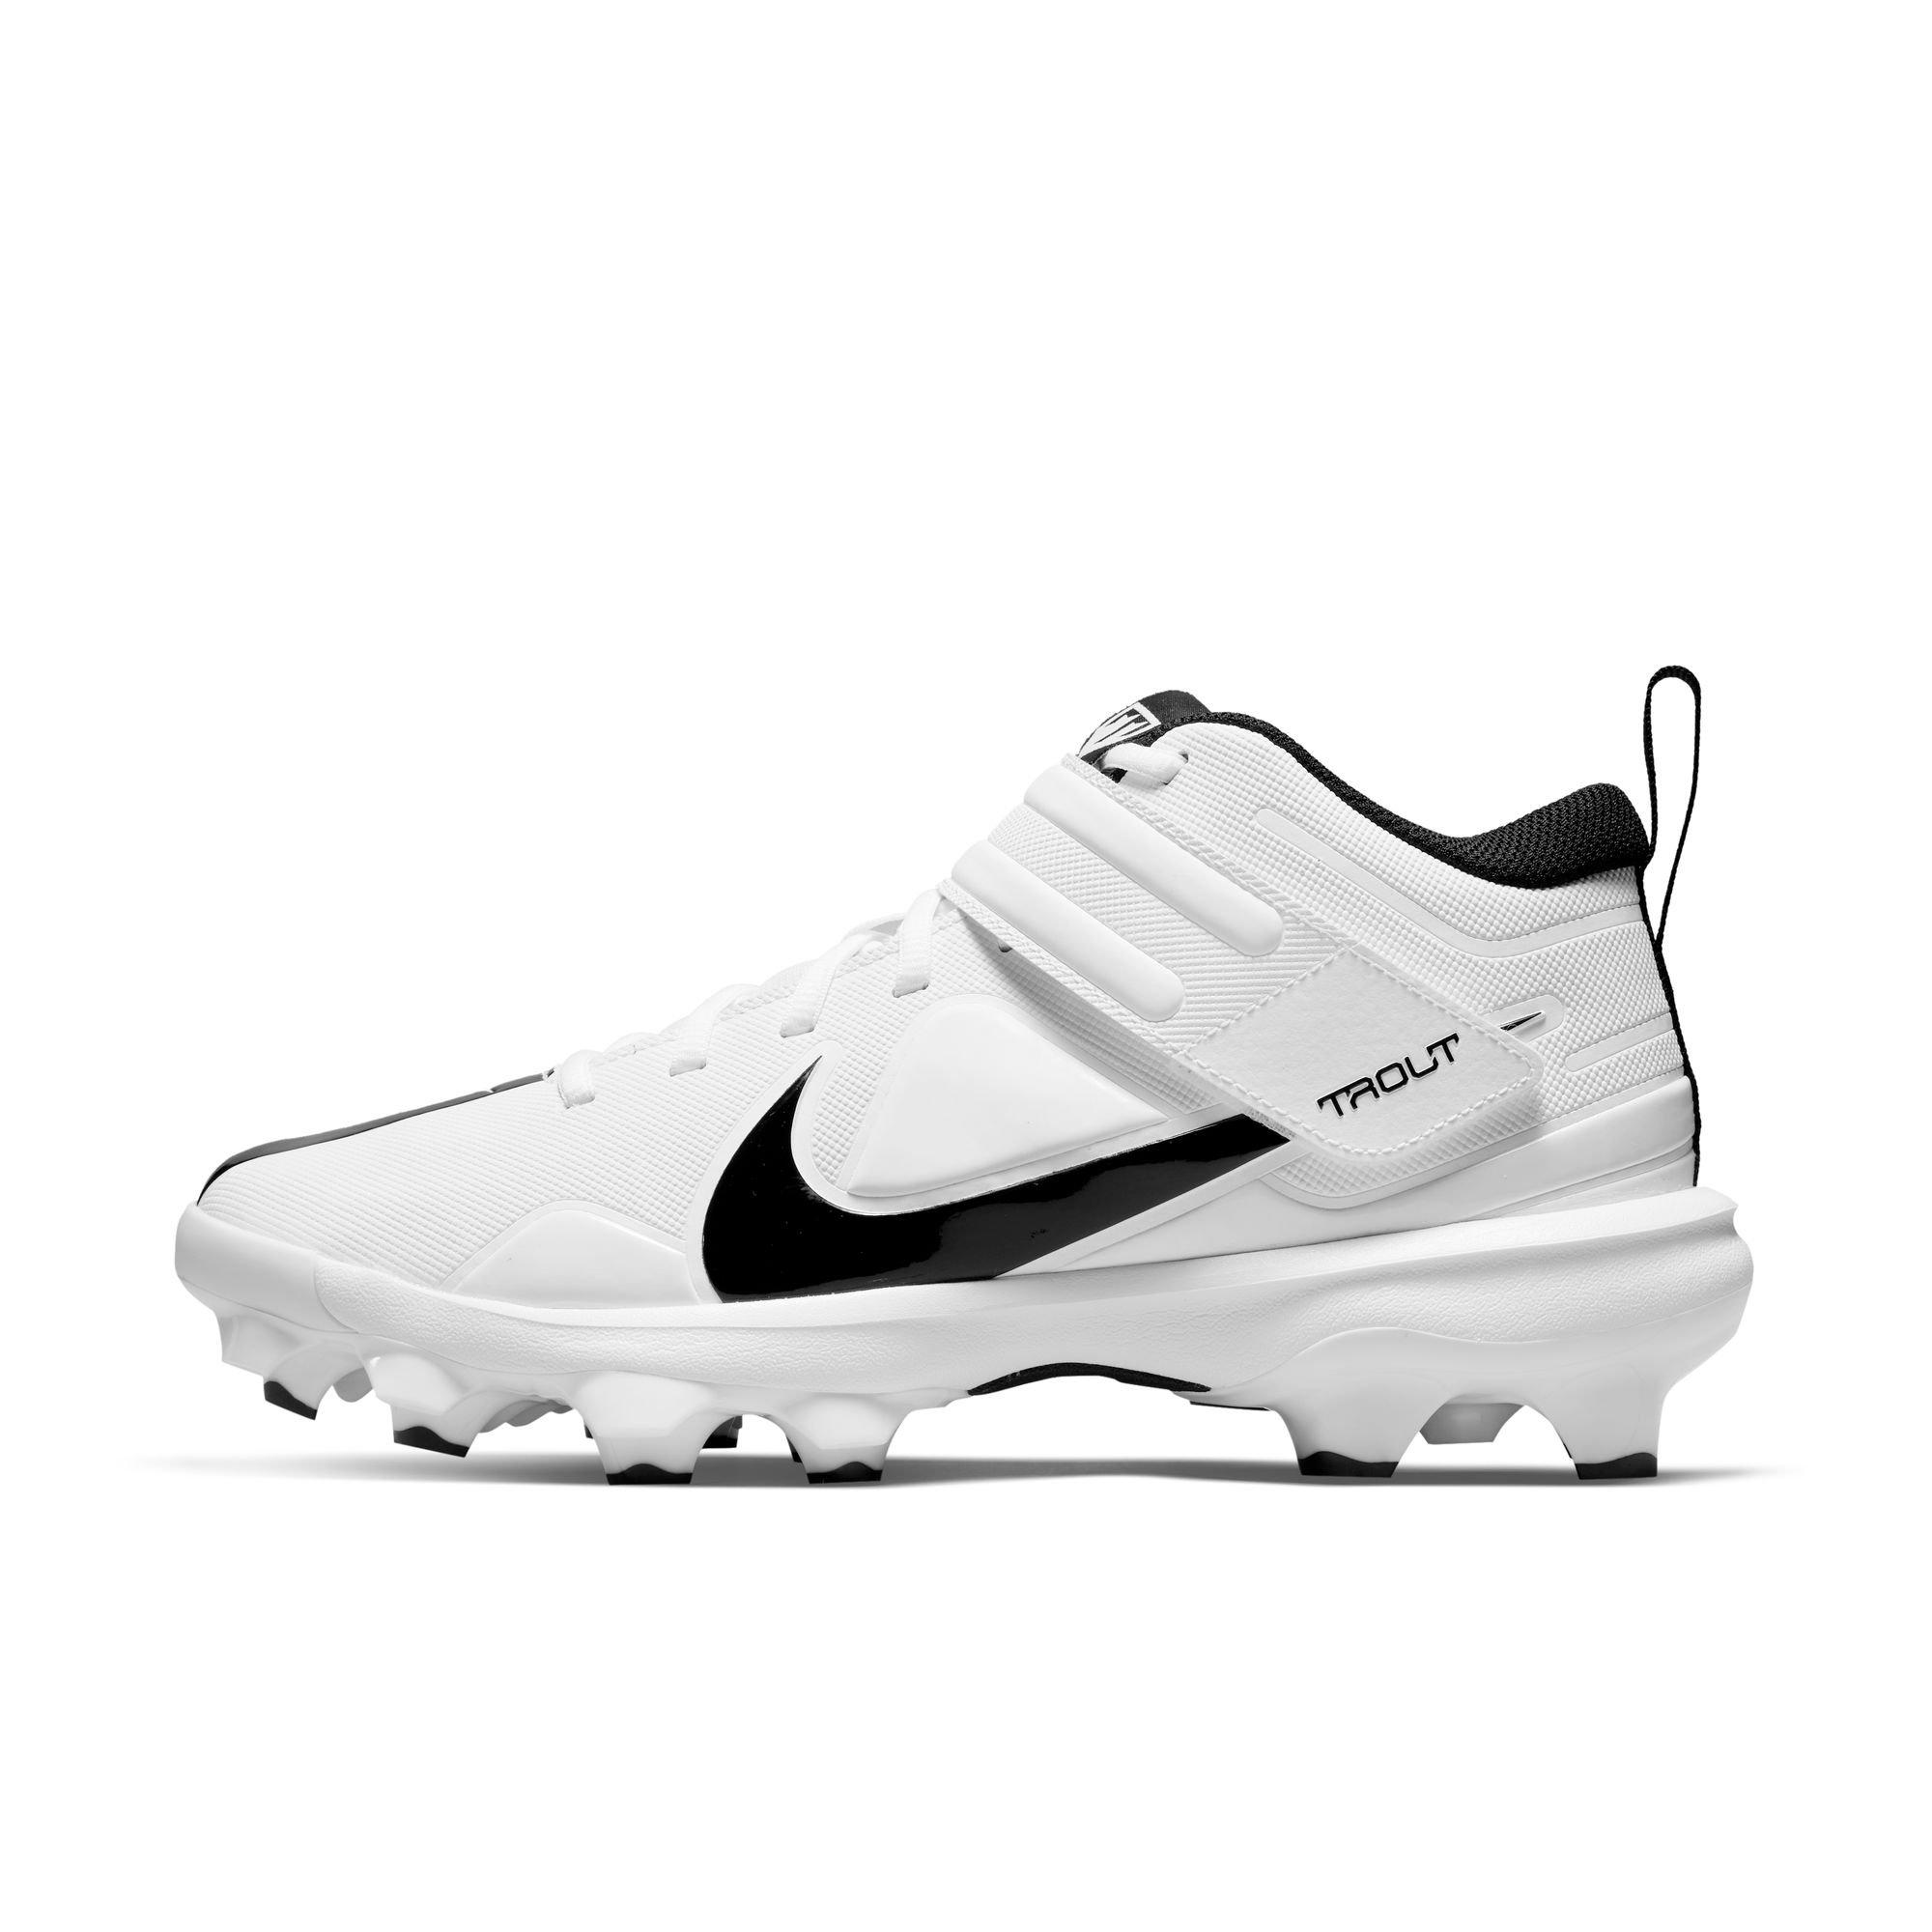 satisfacción Acostumbrados a Requisitos Nike Force Trout 7 Pro MCS "White/Black" Men's Baseball Cleat